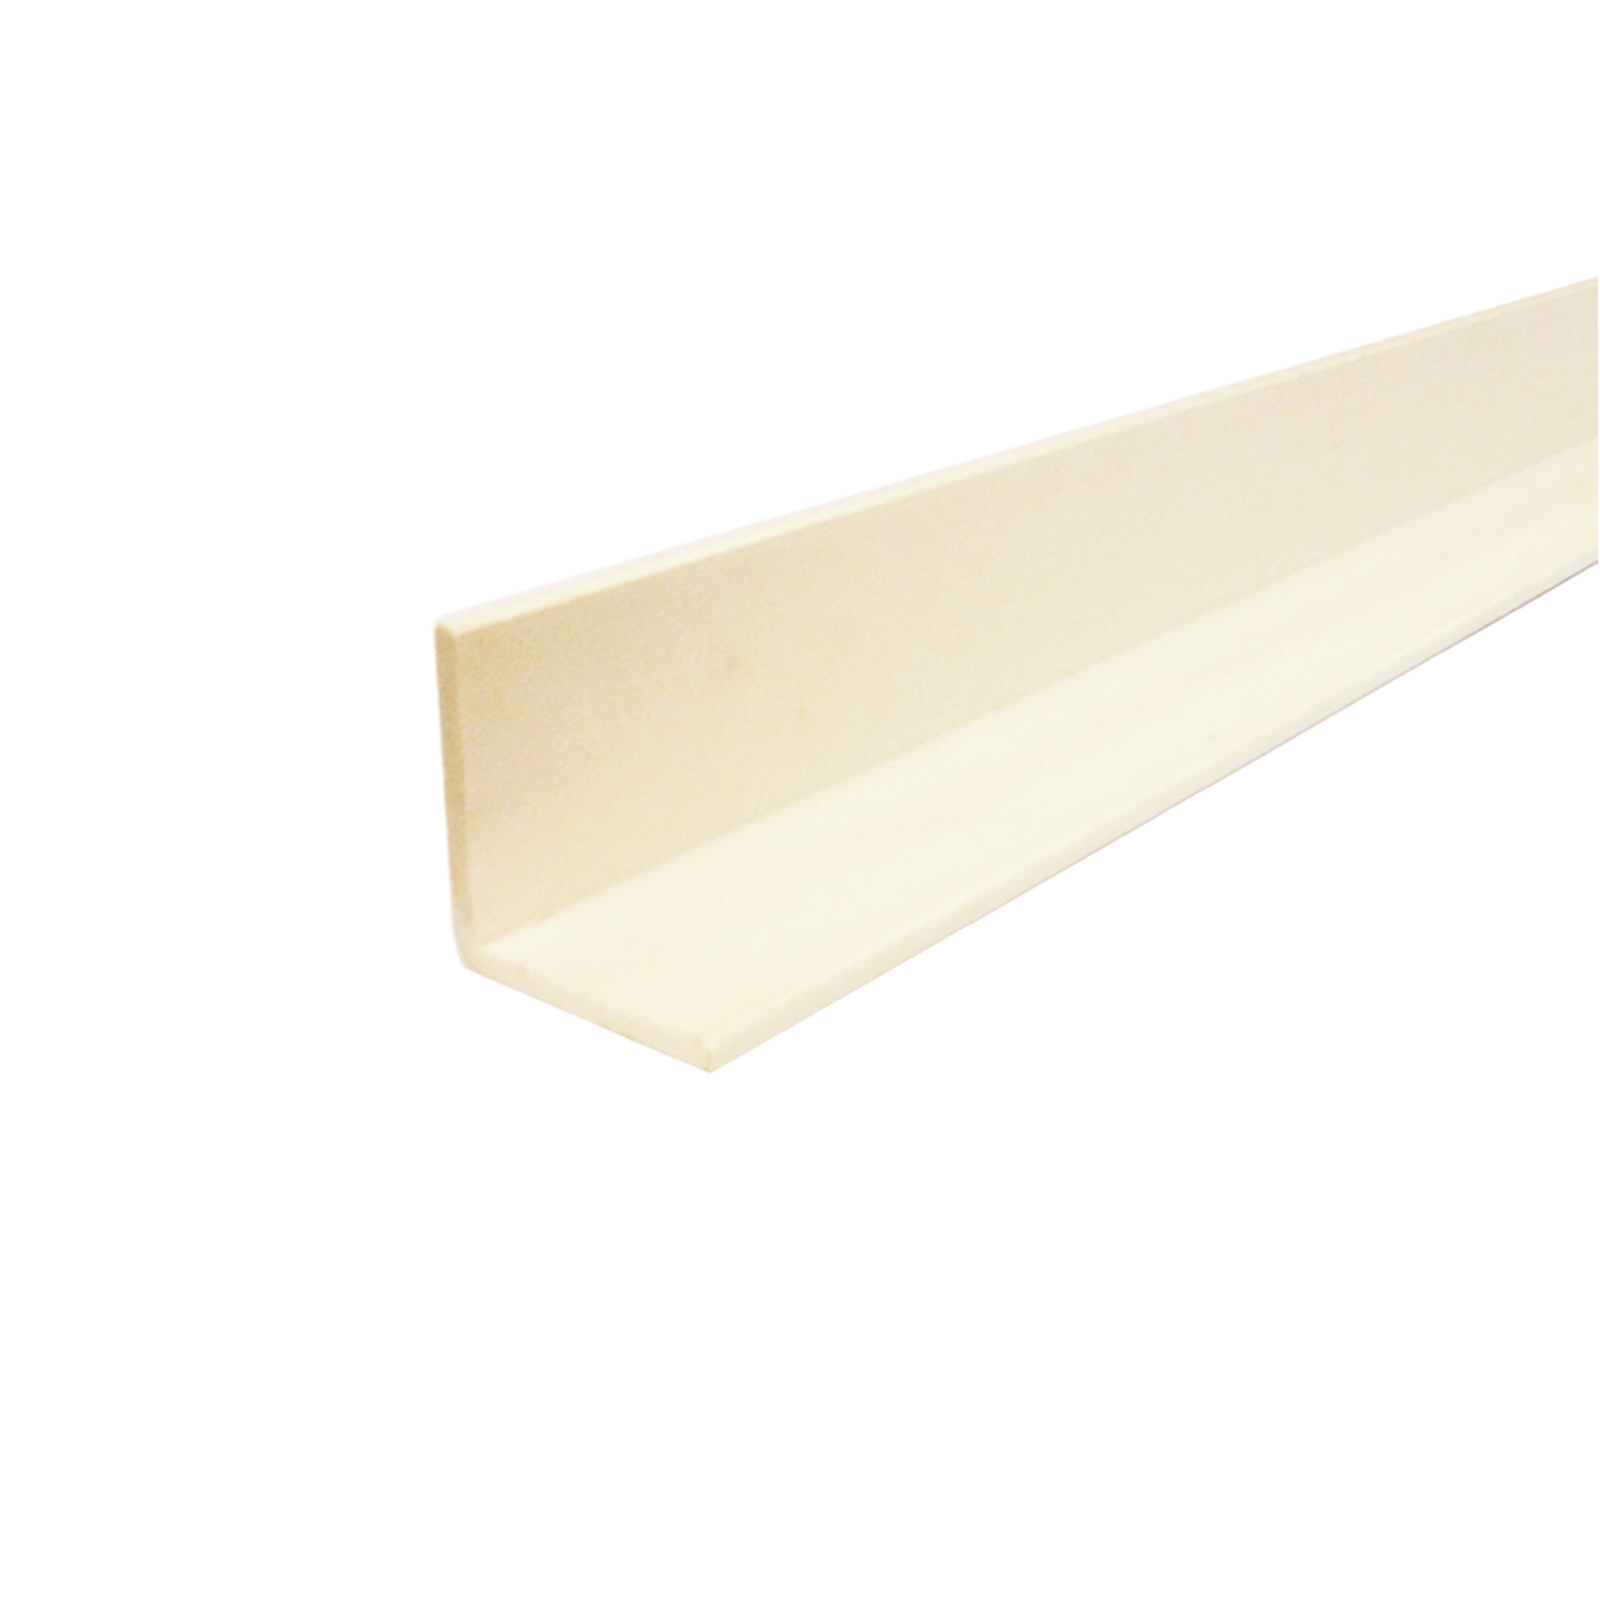 Brutus 47 x 47 x 4mm 3.0m Angle Building Moulding